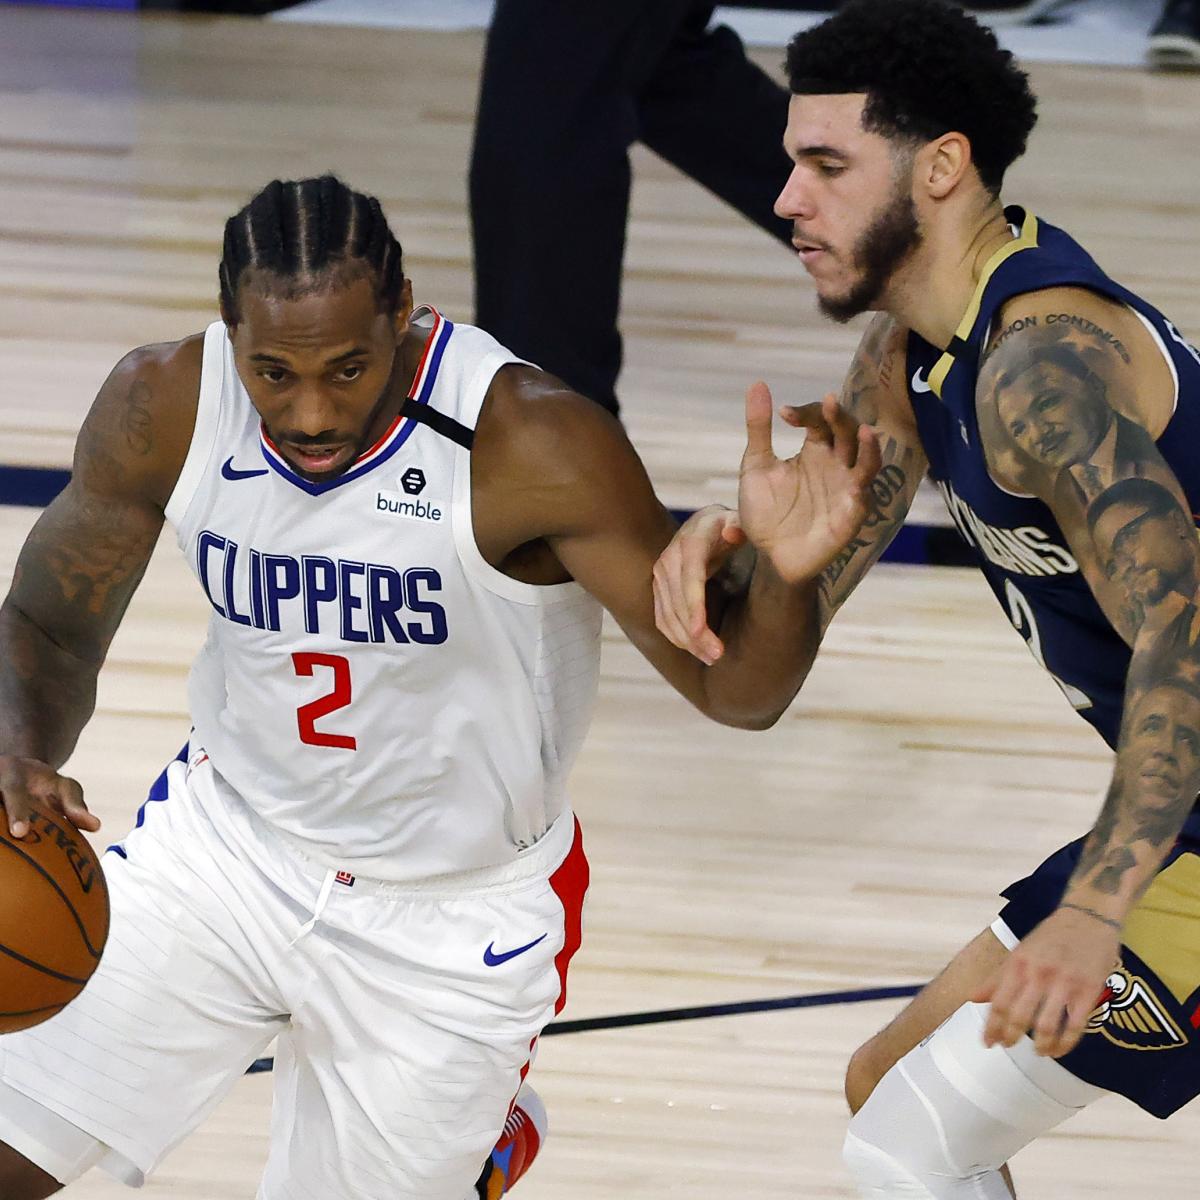 Nba Playoff Picture 2020 Latest East West Standings And Bracket Scenarios Bleacher Report Latest News Videos And Highlights